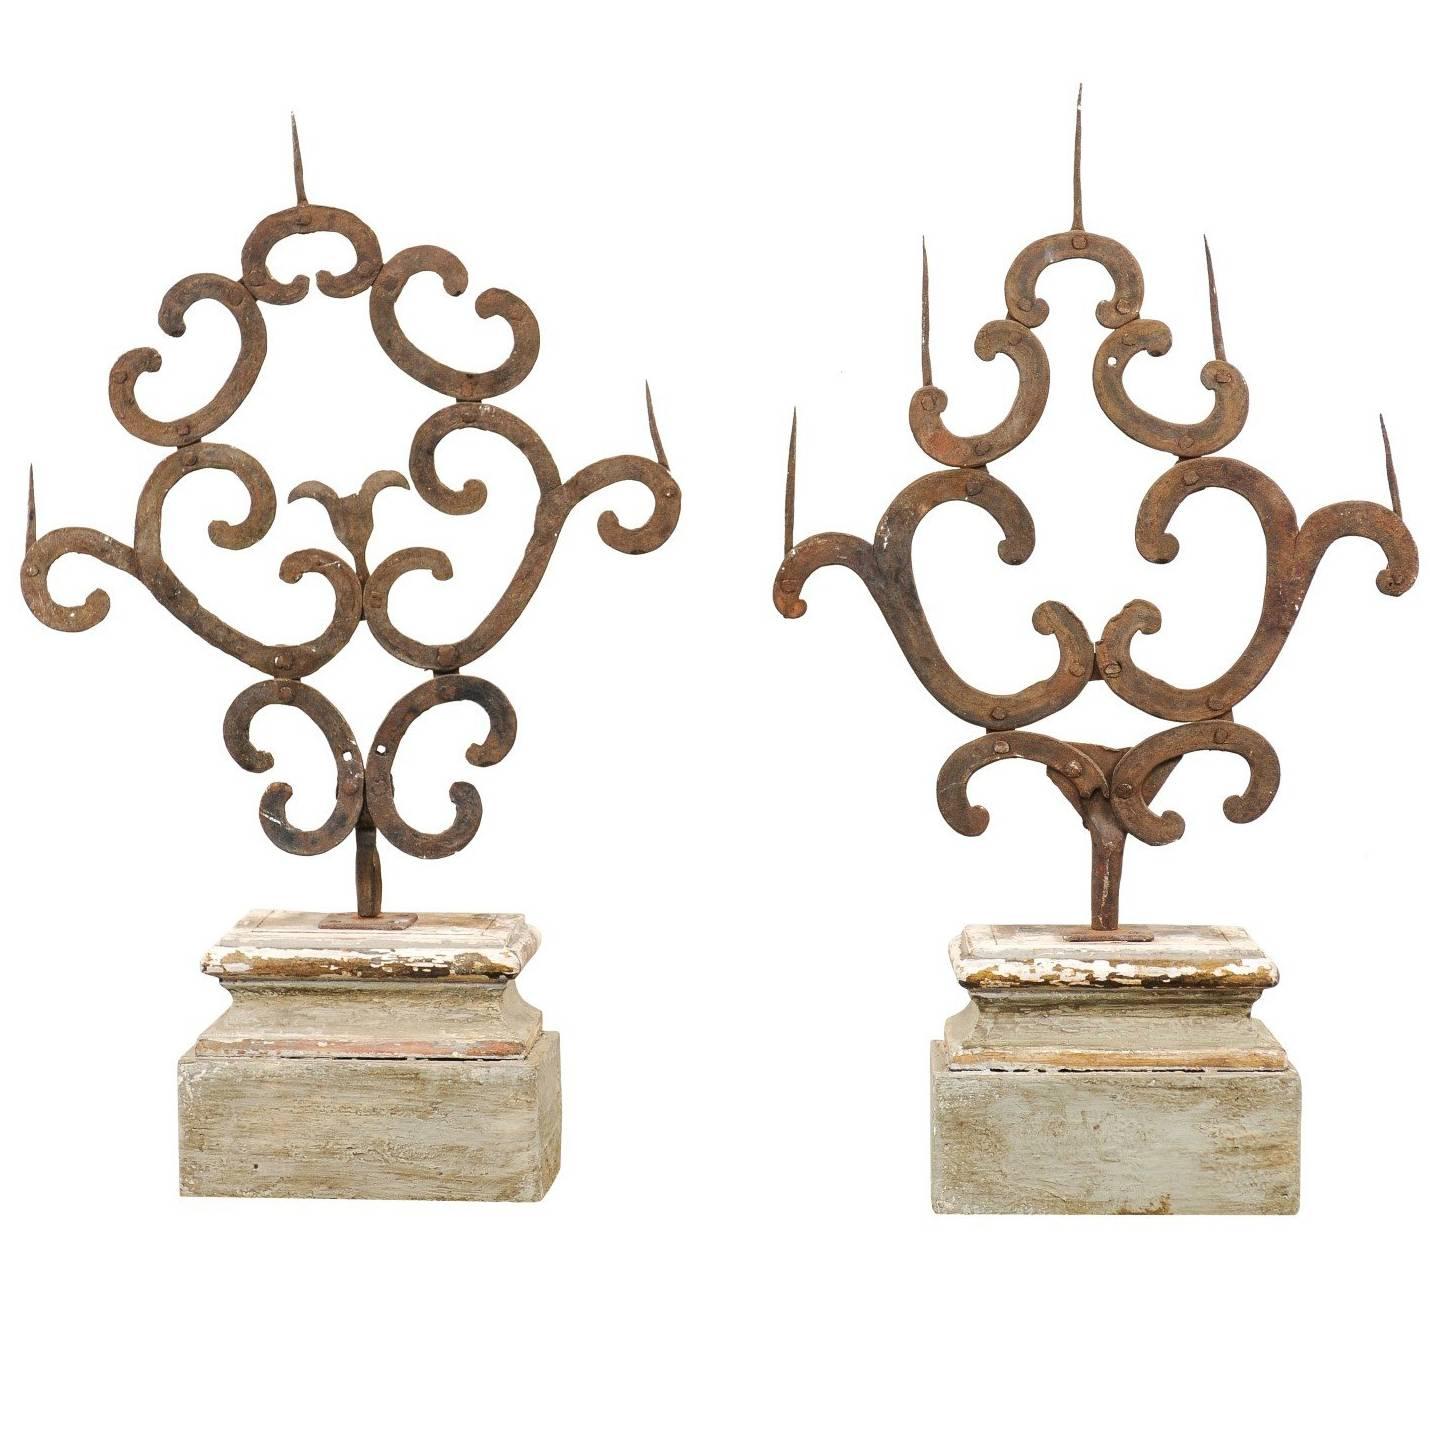 Pair of 18th Century Italian Hand-Forged Iron Prickets Mounted on Painted Wood